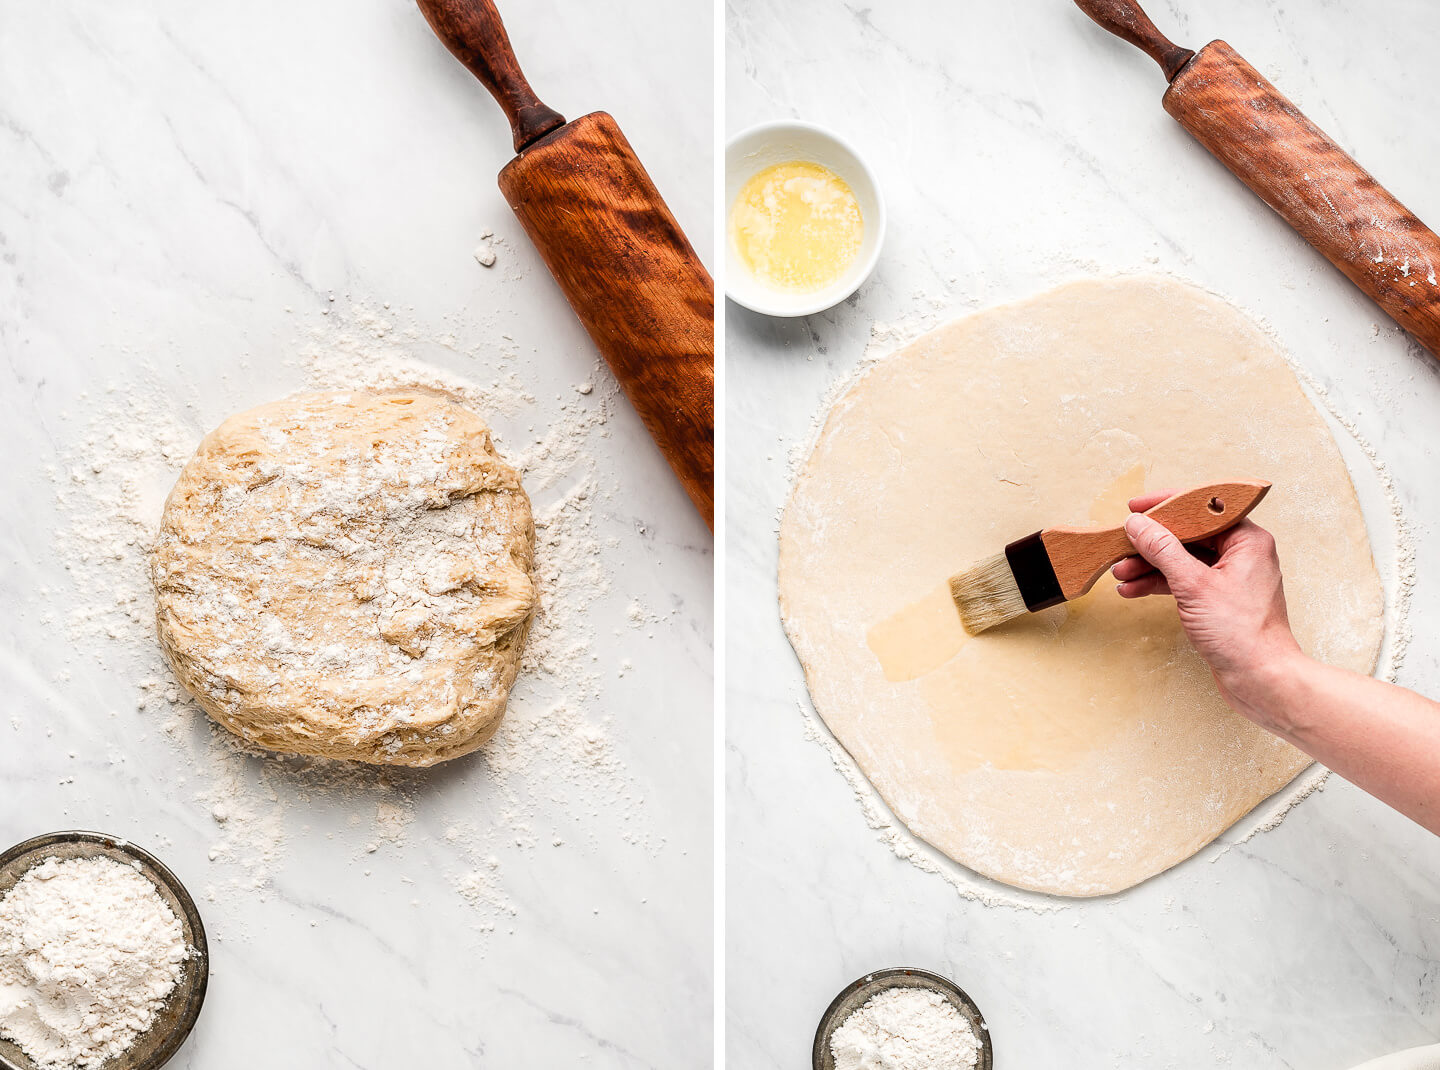 Diptych- Mound of dough on a floured surface with a rolling pin to the side; Brushing melted butter onto a rolled out circle of dough.